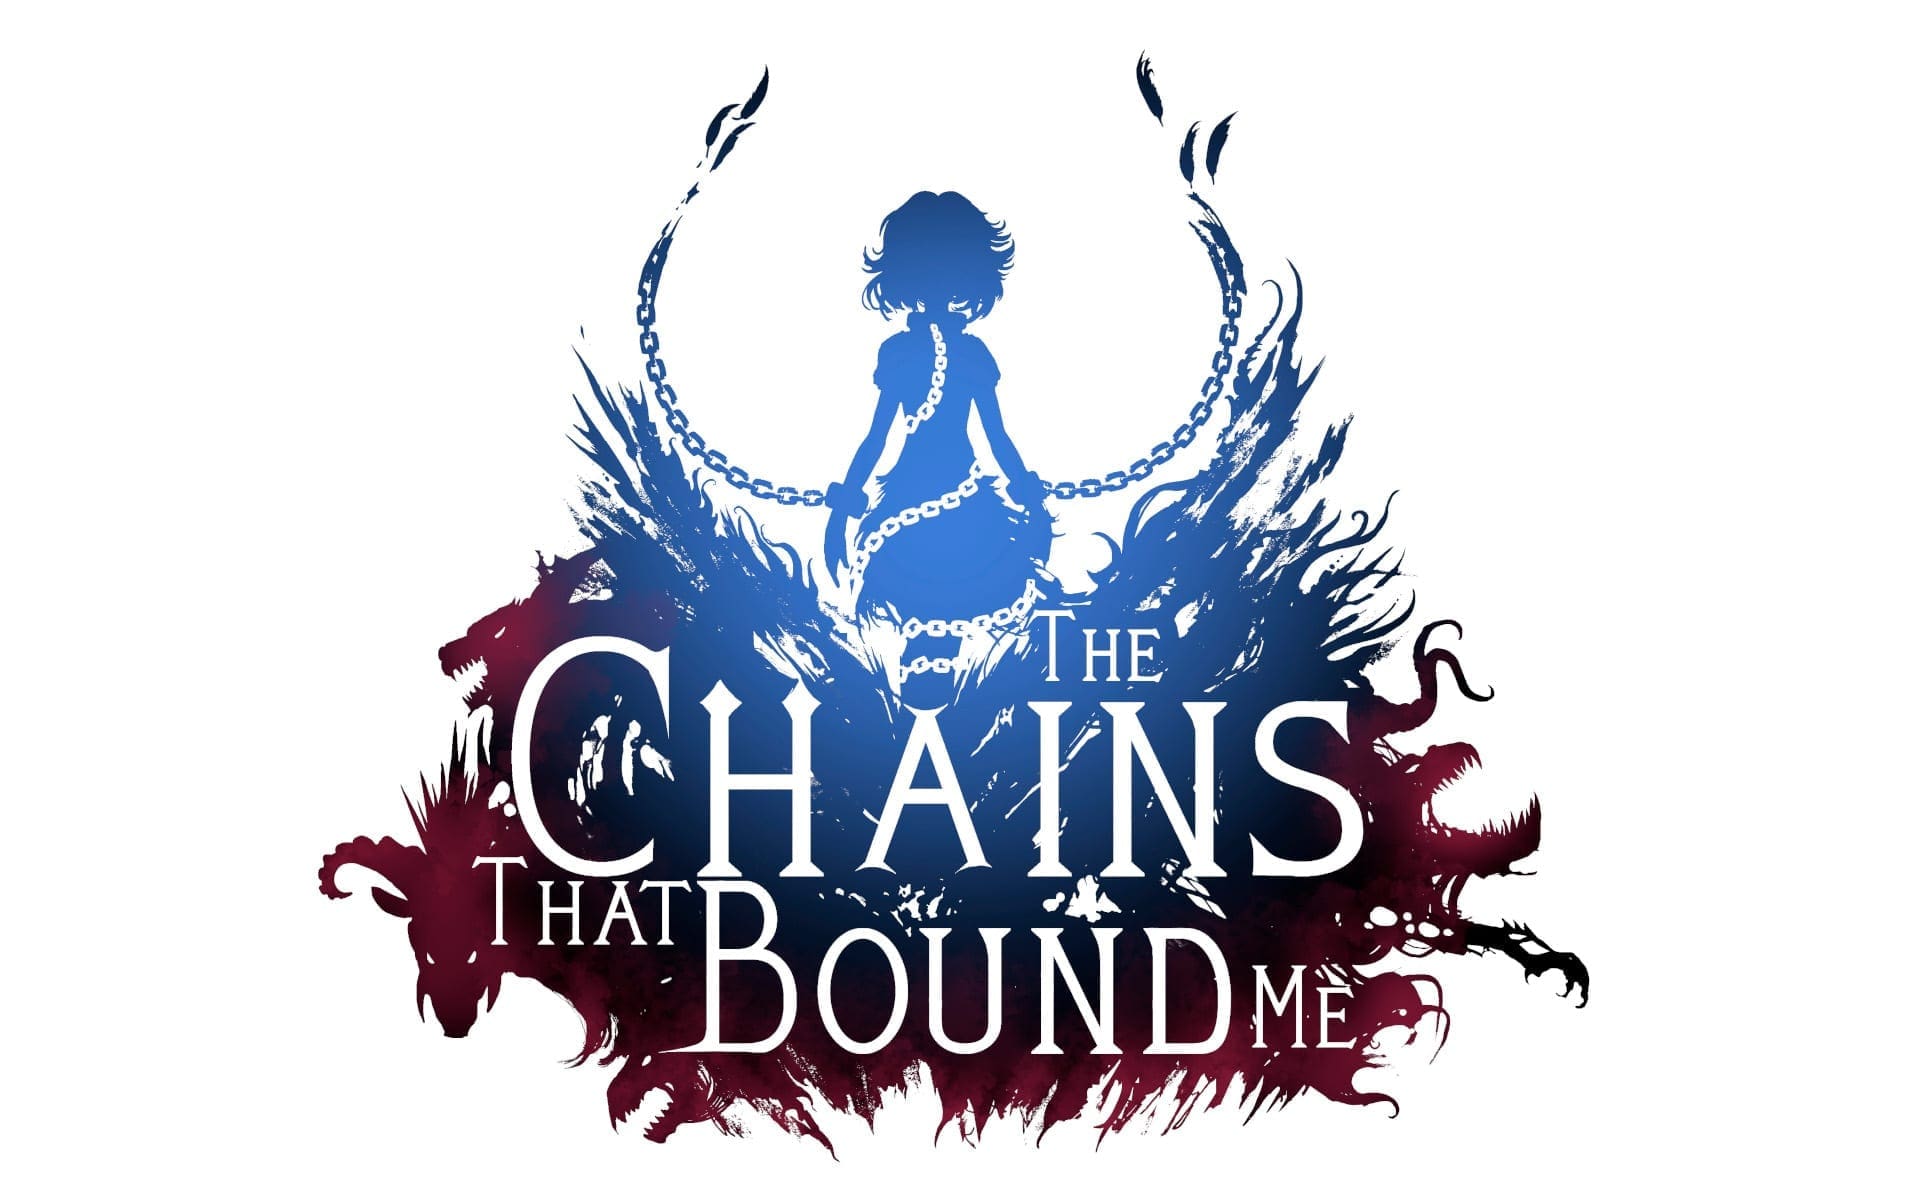 The chains that bound me